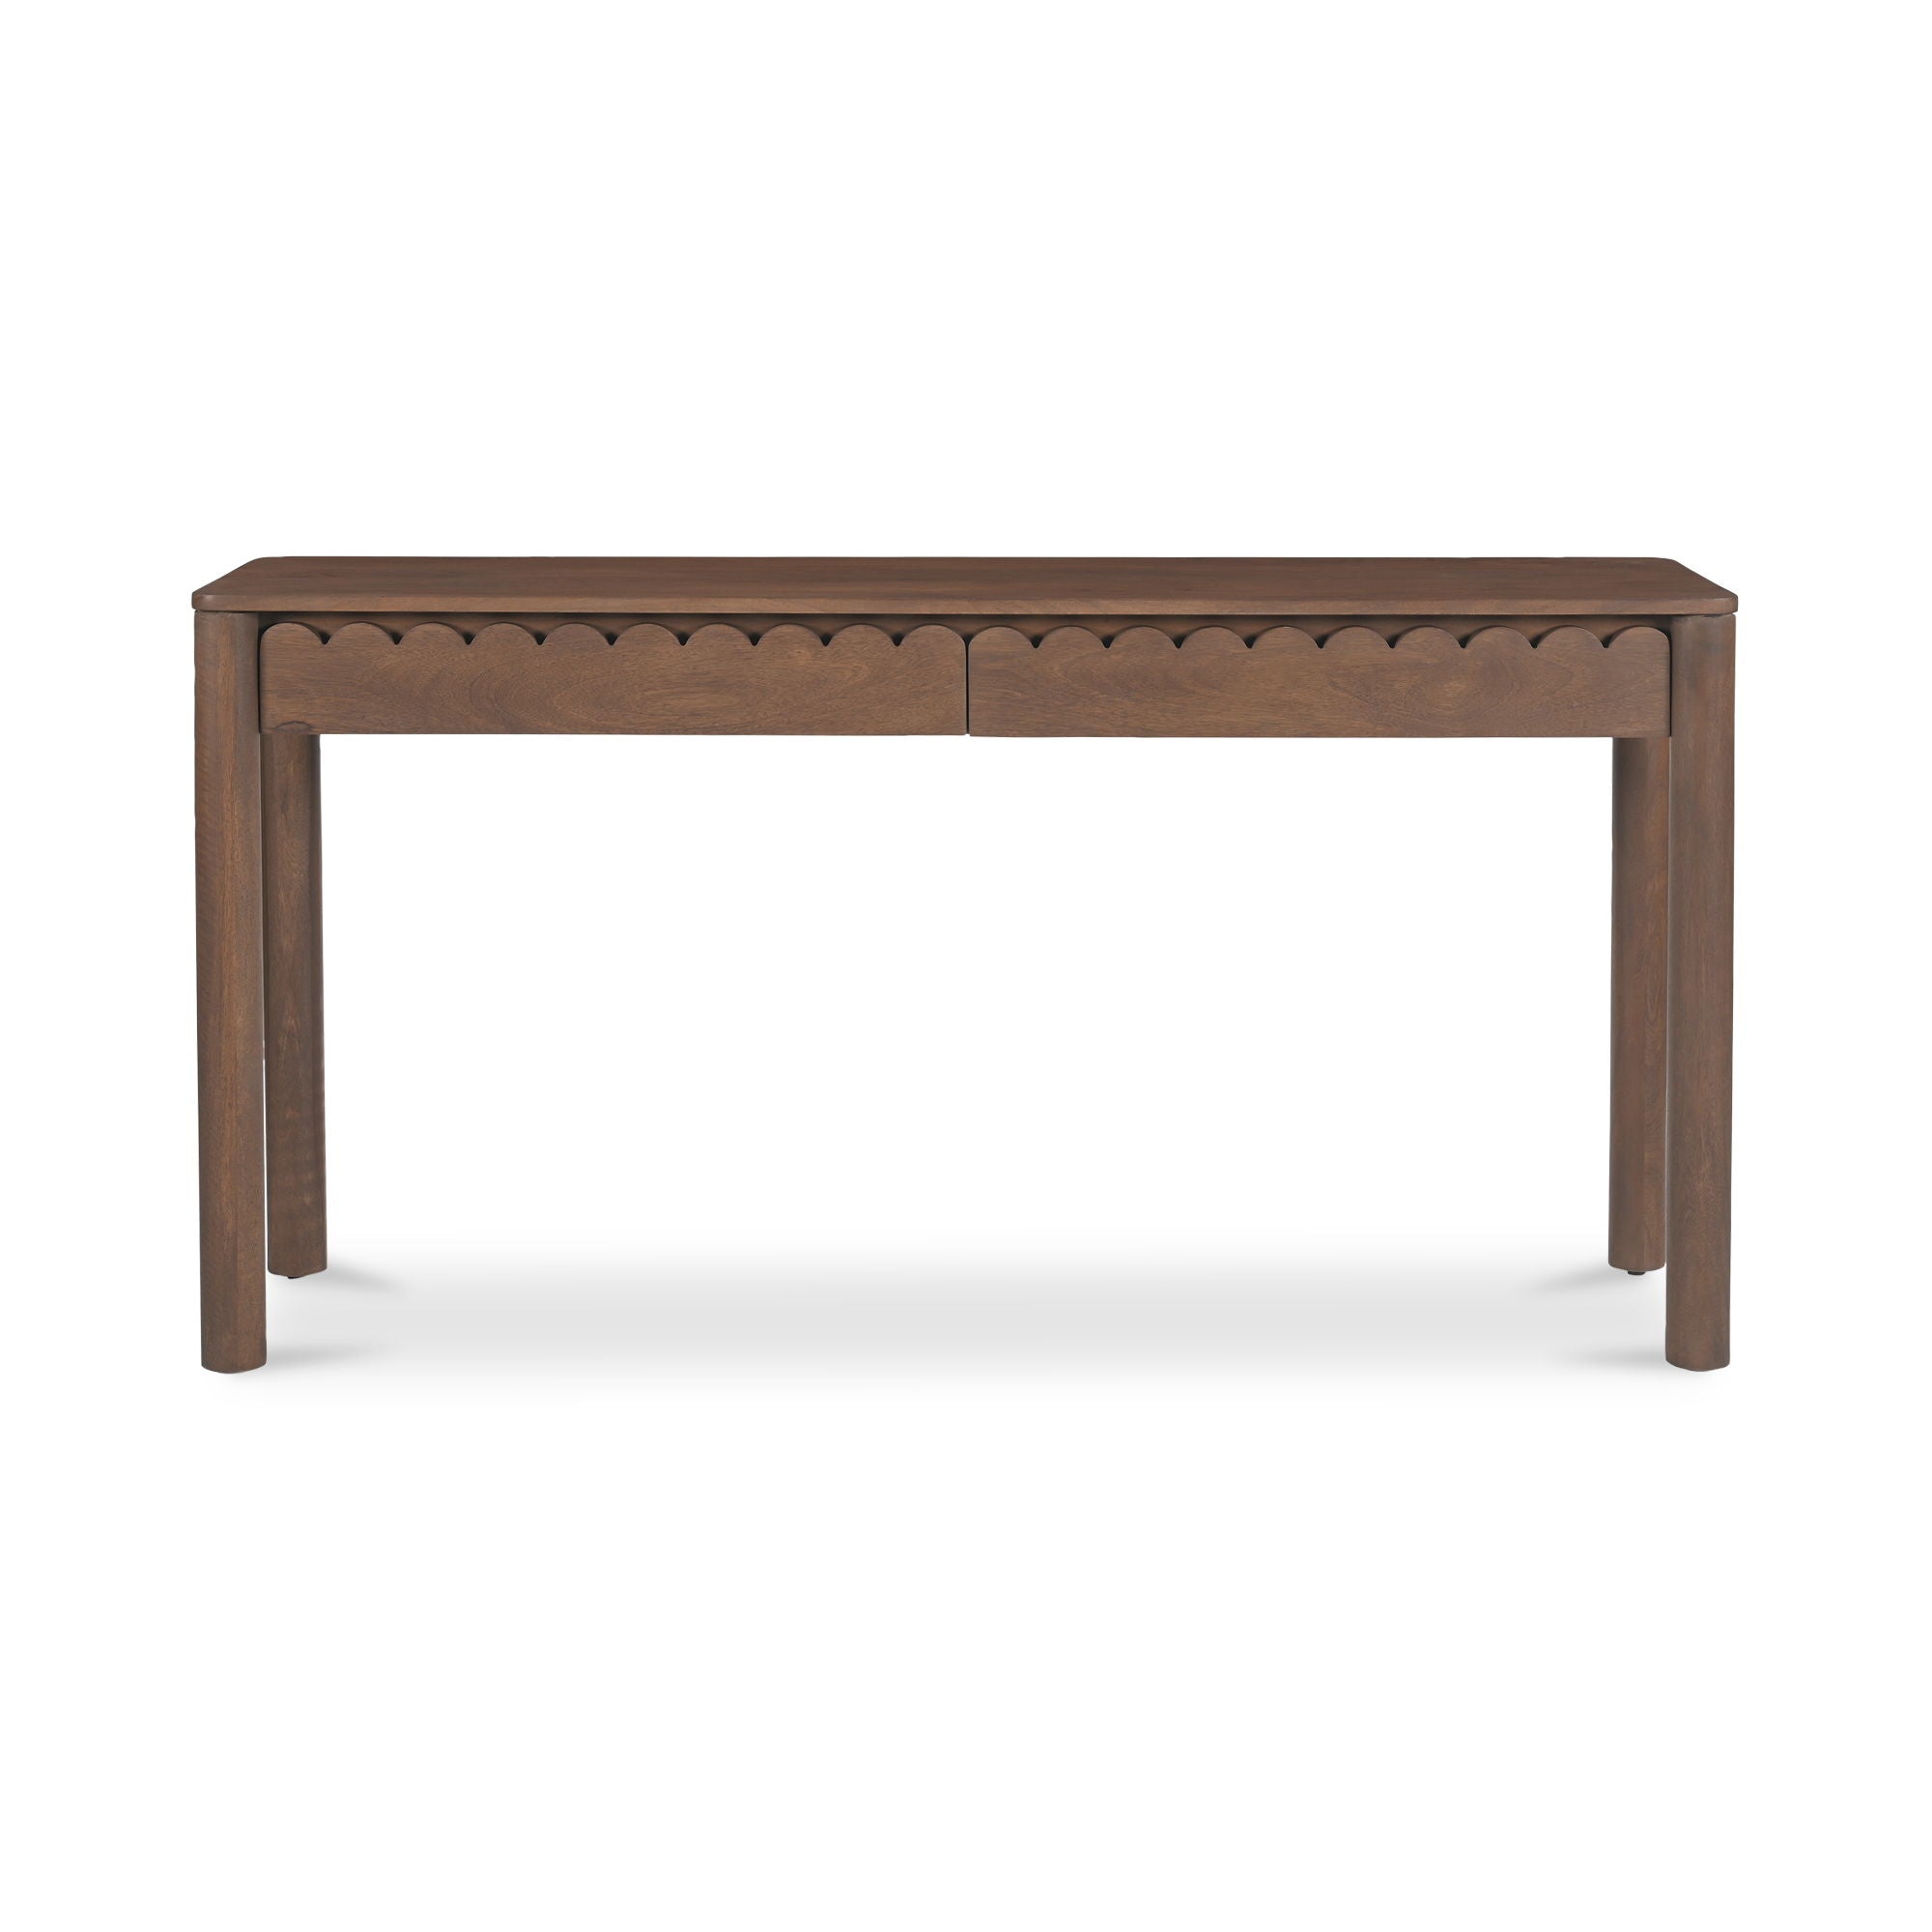 Wiley - Console Table - Vintage Brown